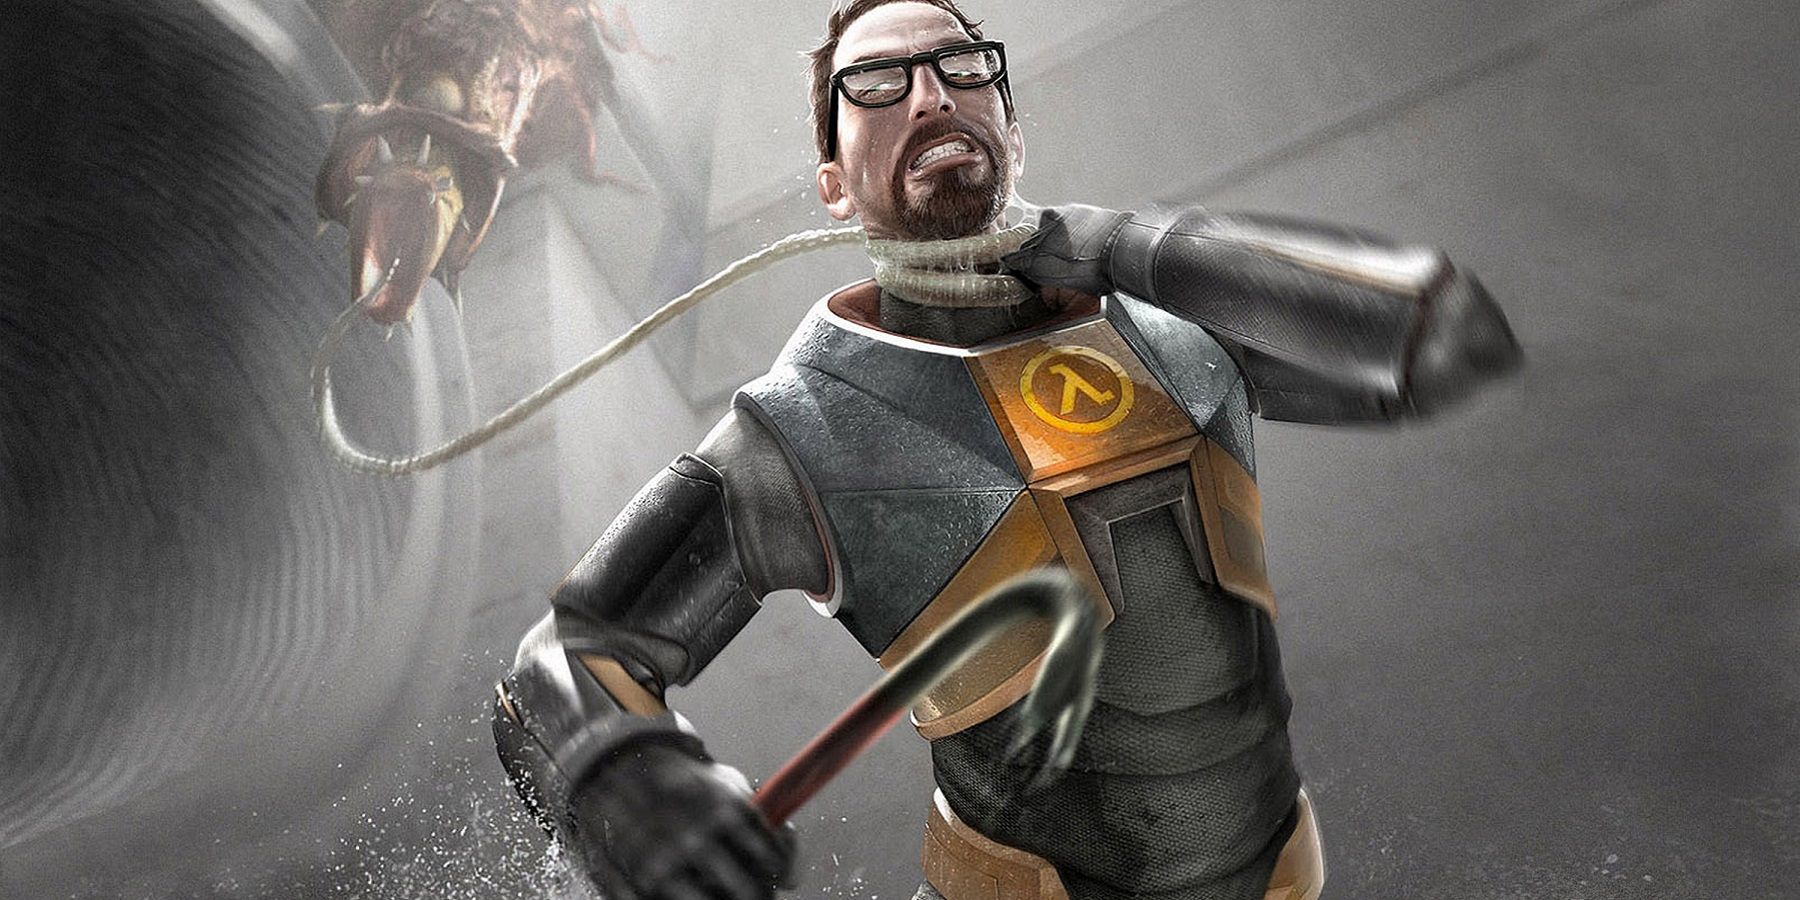 Image from Half-Life showing Gordon Freeman being strangled by a barnacle.